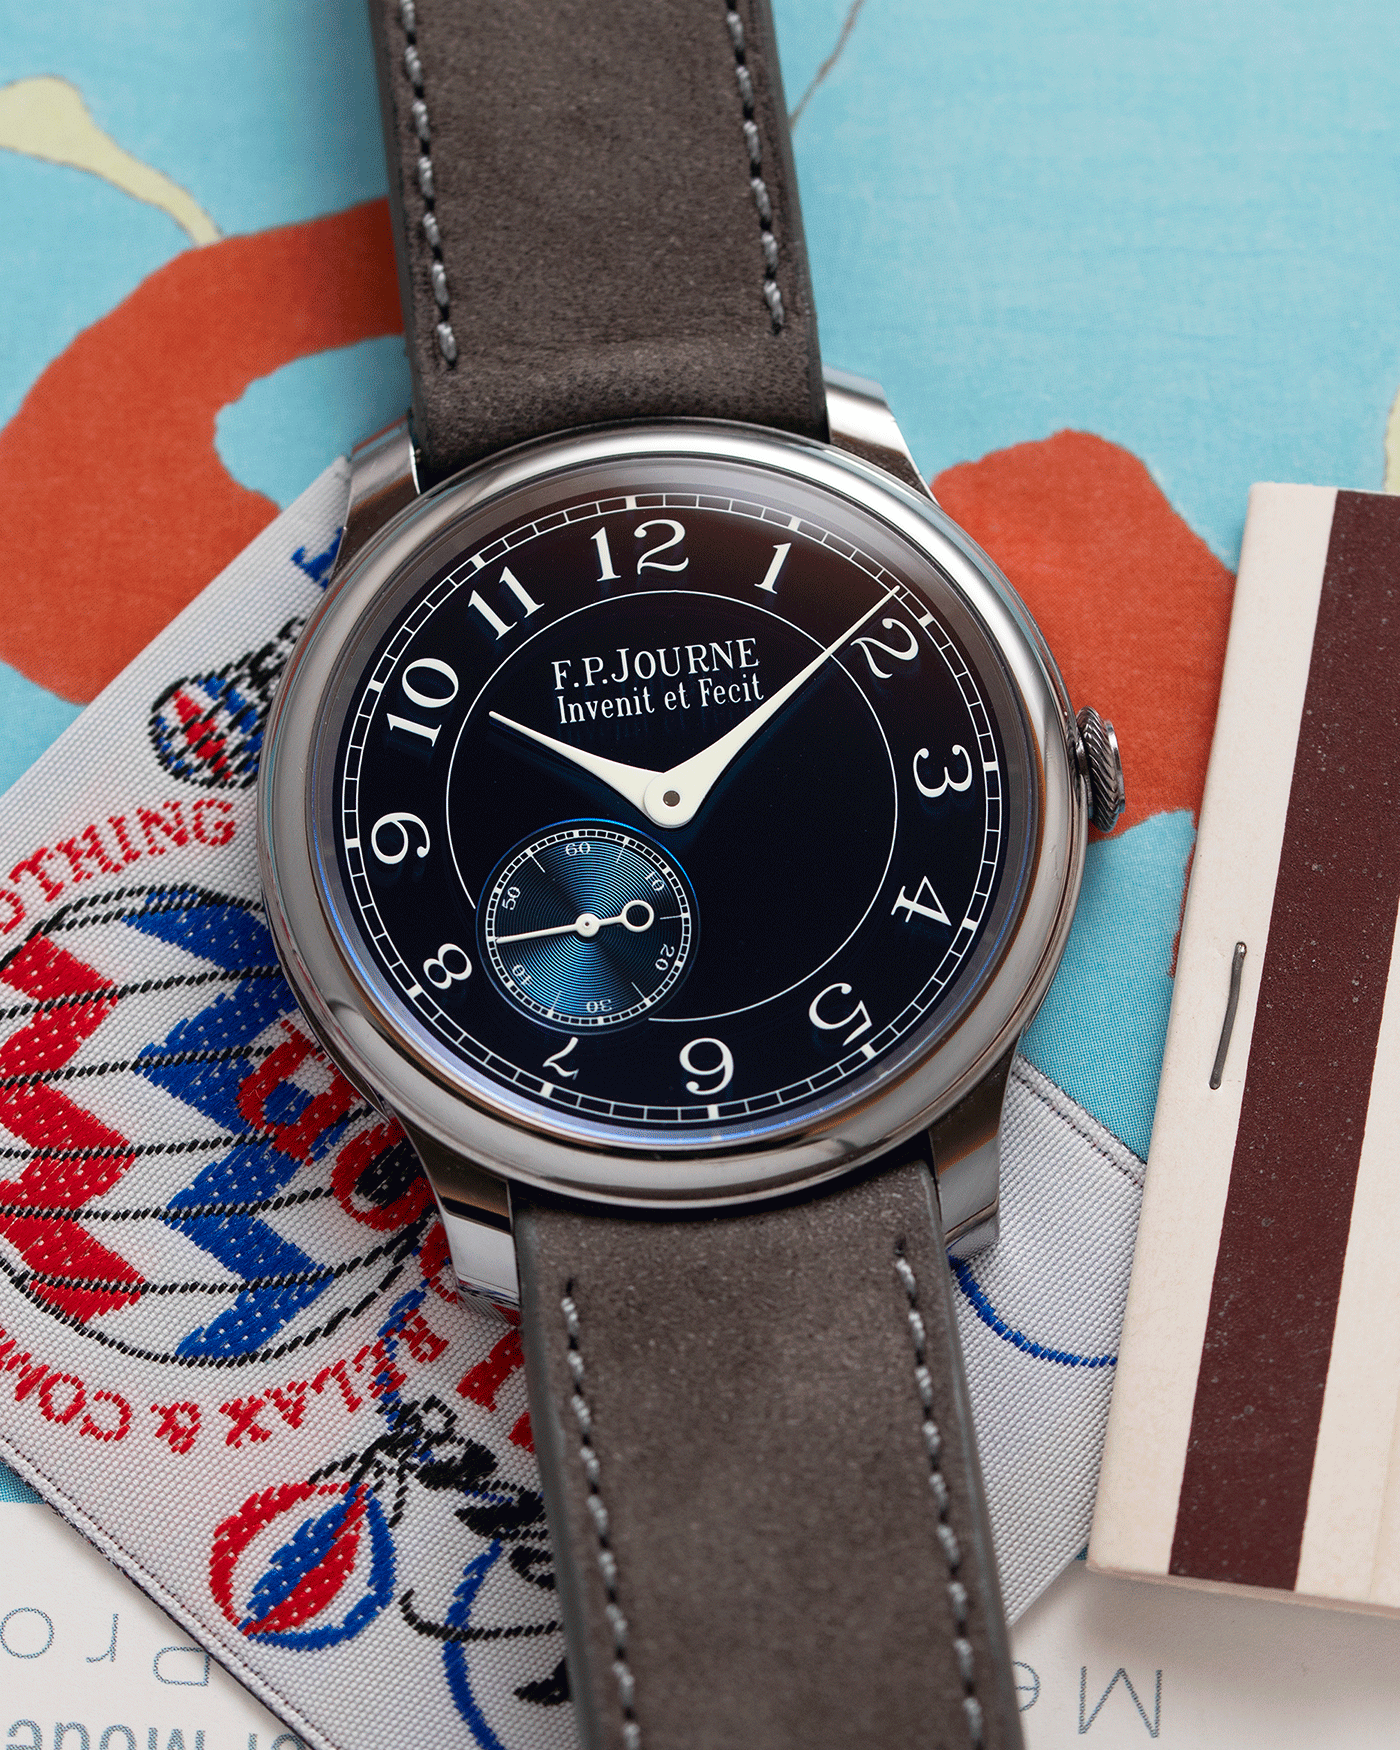 Brand: F.P. Journe Year: 2016 Model: Chronometre Bleu Material: Tantalum Movement: in-house FPJ calibre 1304 Case Diameter: 39mm Bracelet/Strap: A Collected Man Grey Nubuck Strap and F.P. Journe Brown Alligator and Tantalum Tang Buckle